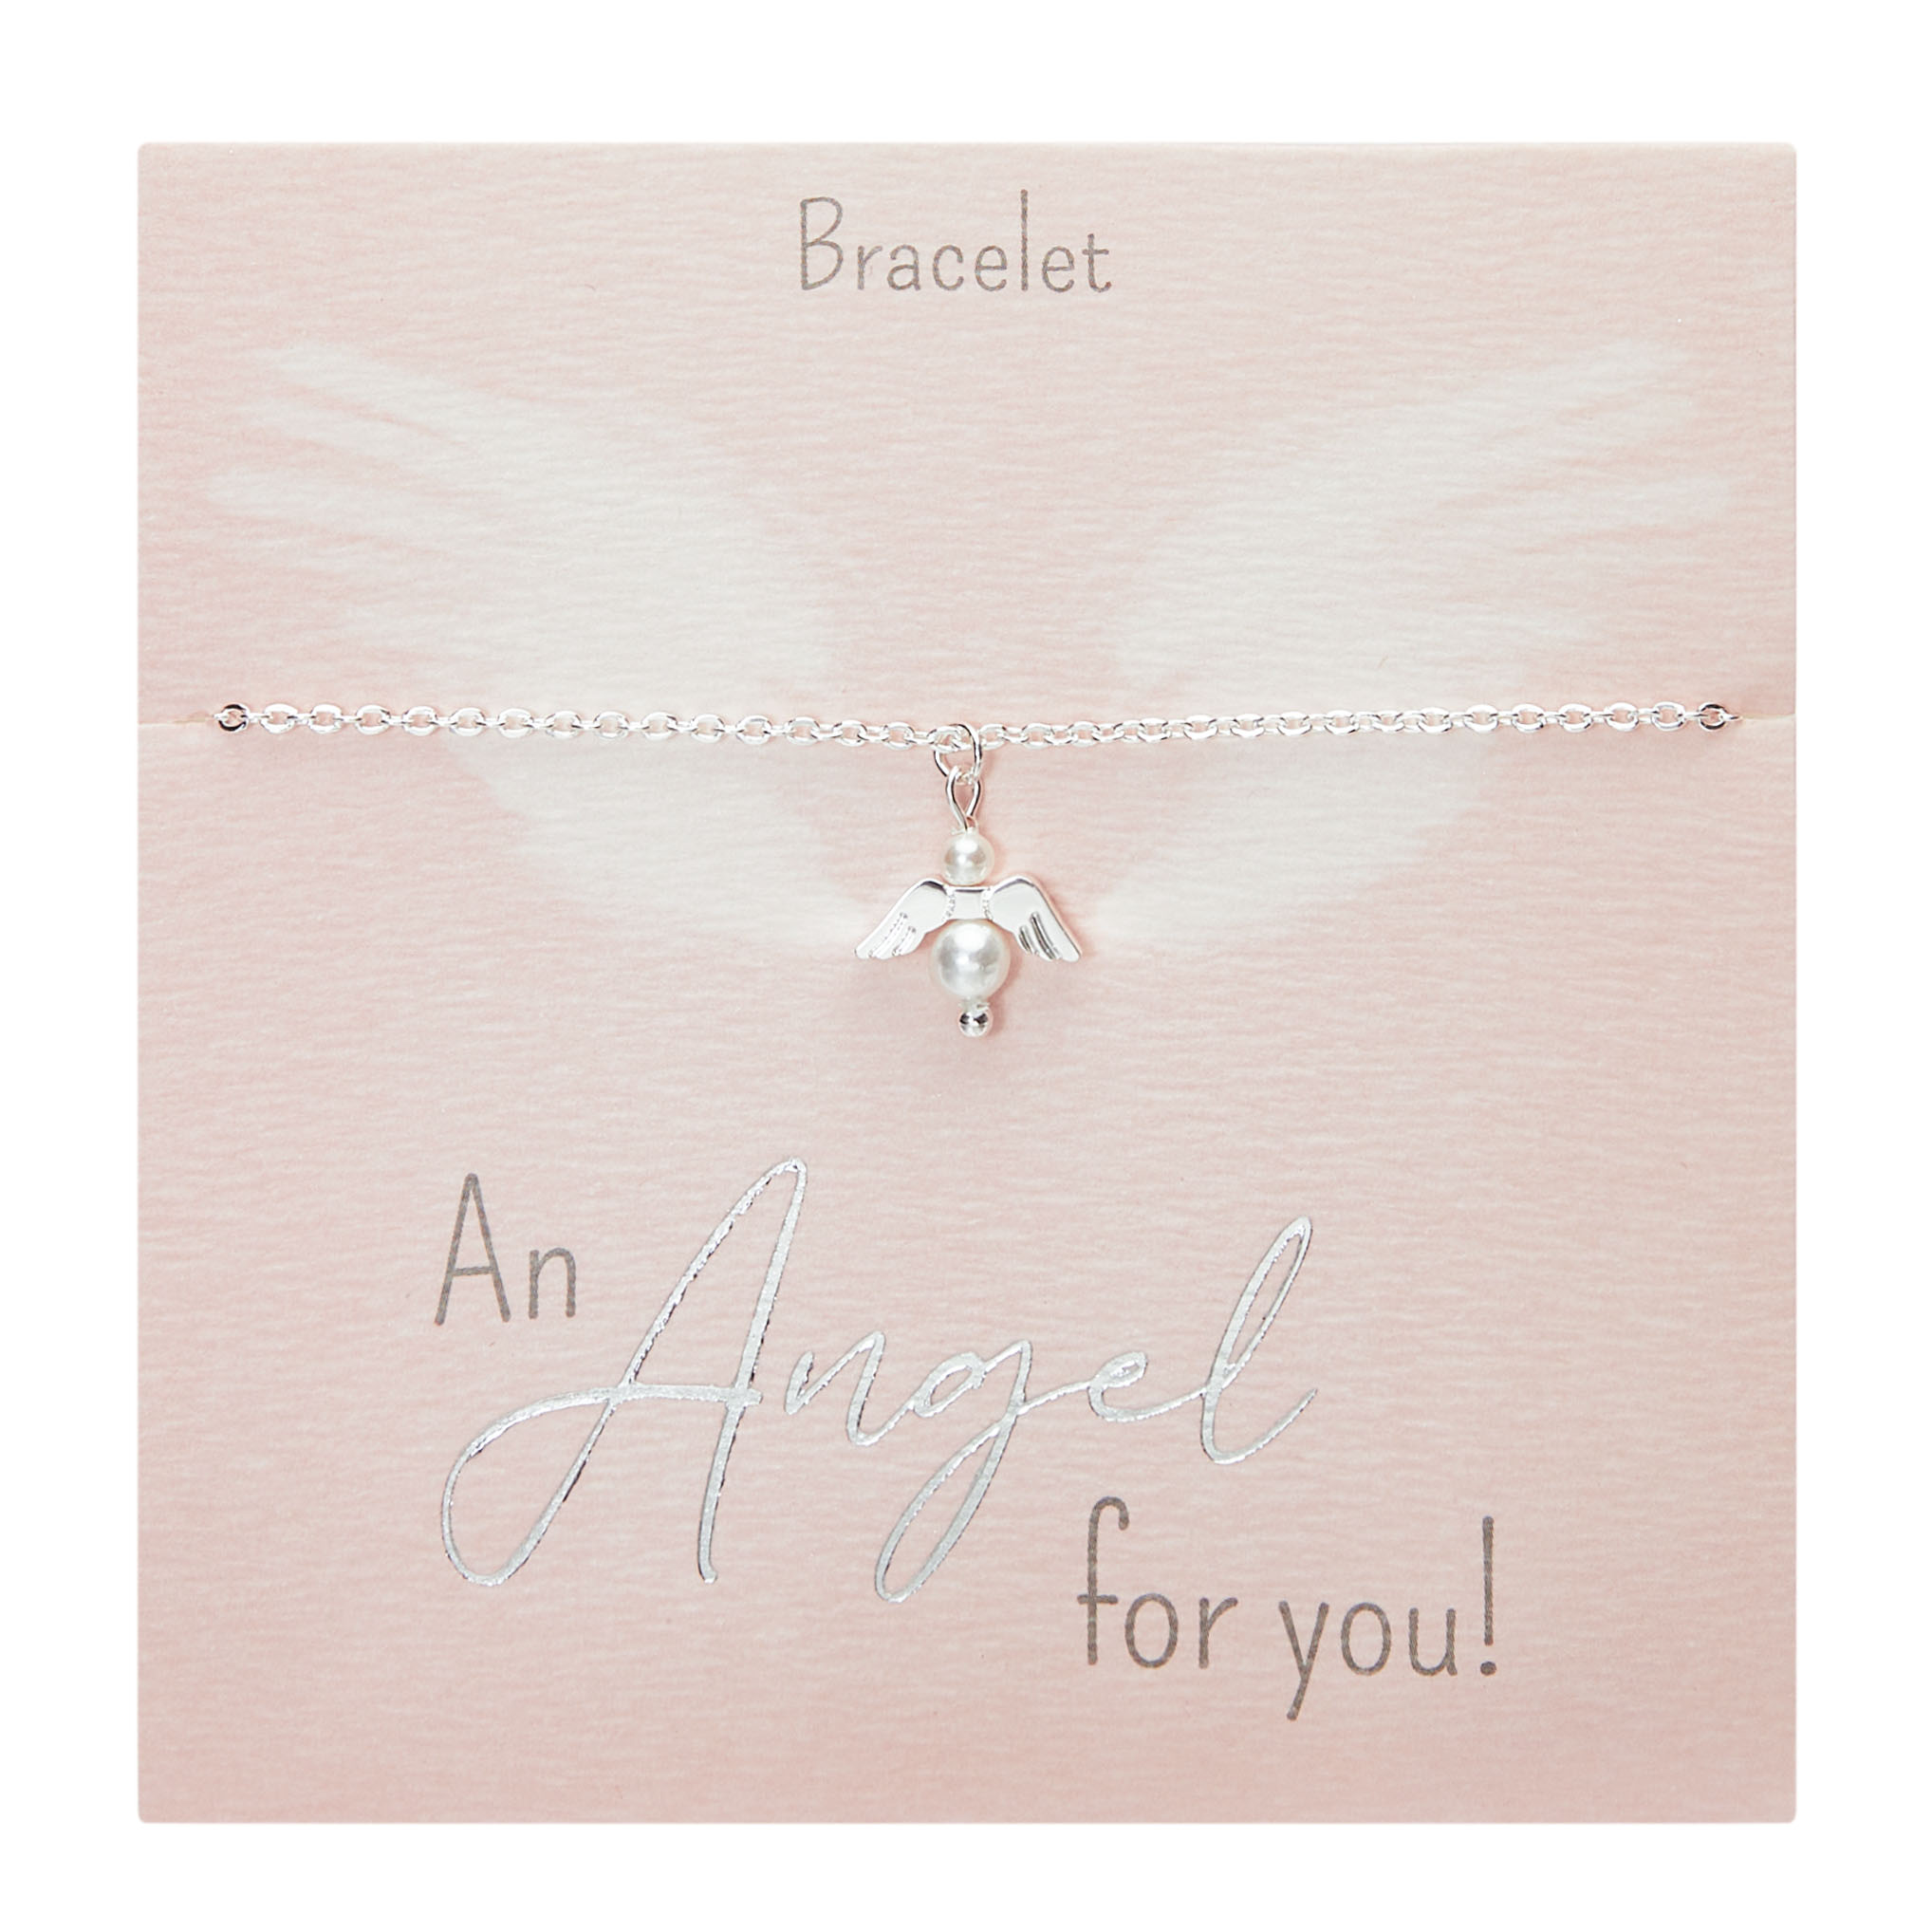 Display  Armbänder "An Angel for you"